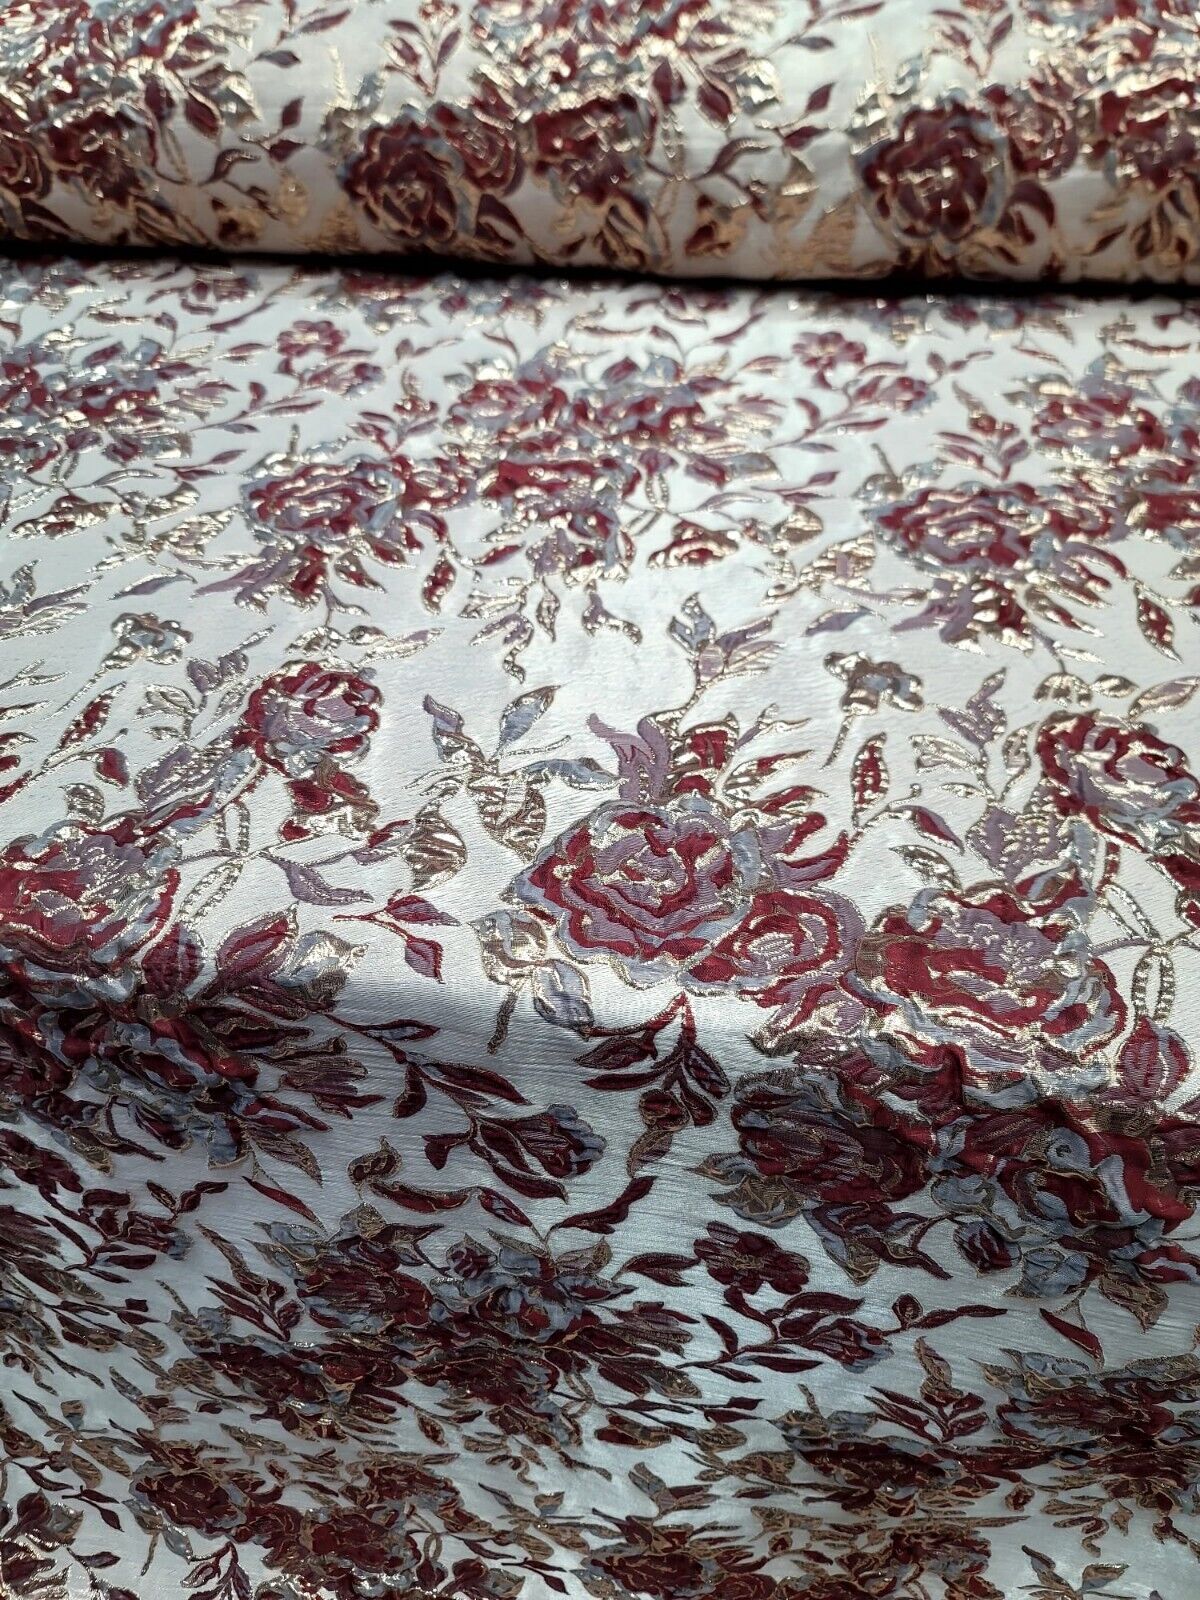 Fabric Sold By The Yard Burgundy METALLIC Brocade Floral Flowers Dress Upholster